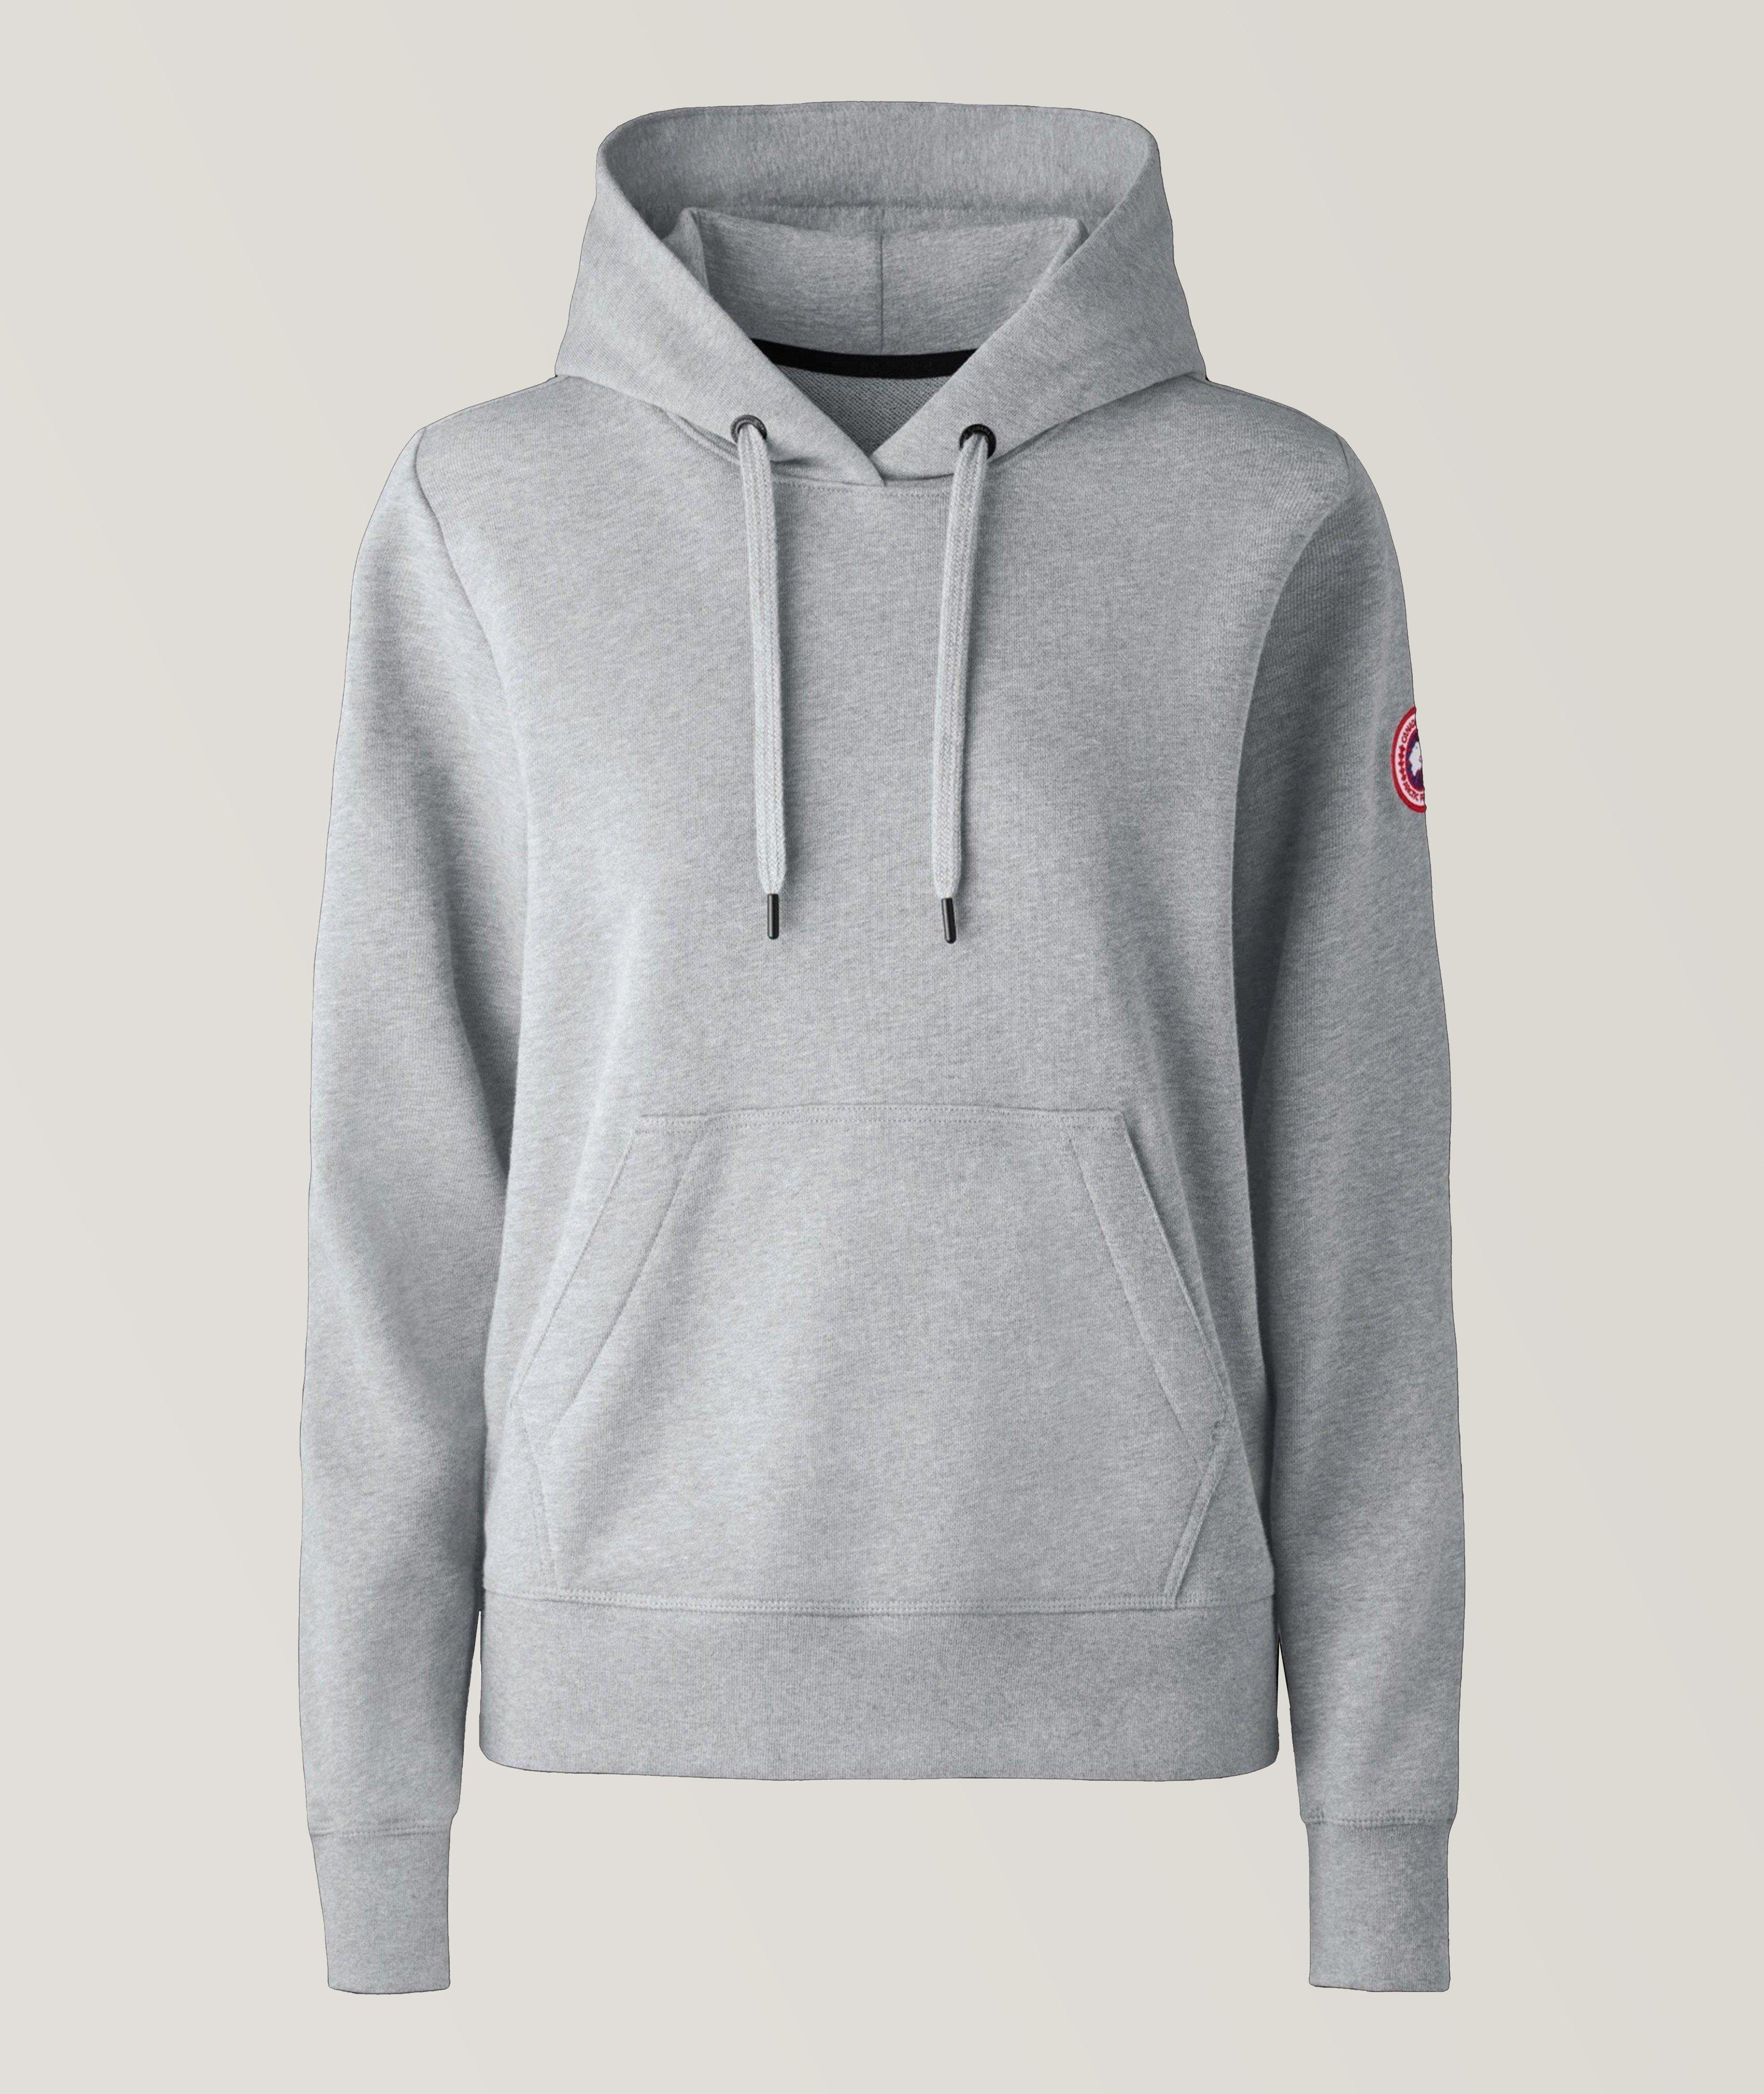 Huron Hooded Sweater image 0